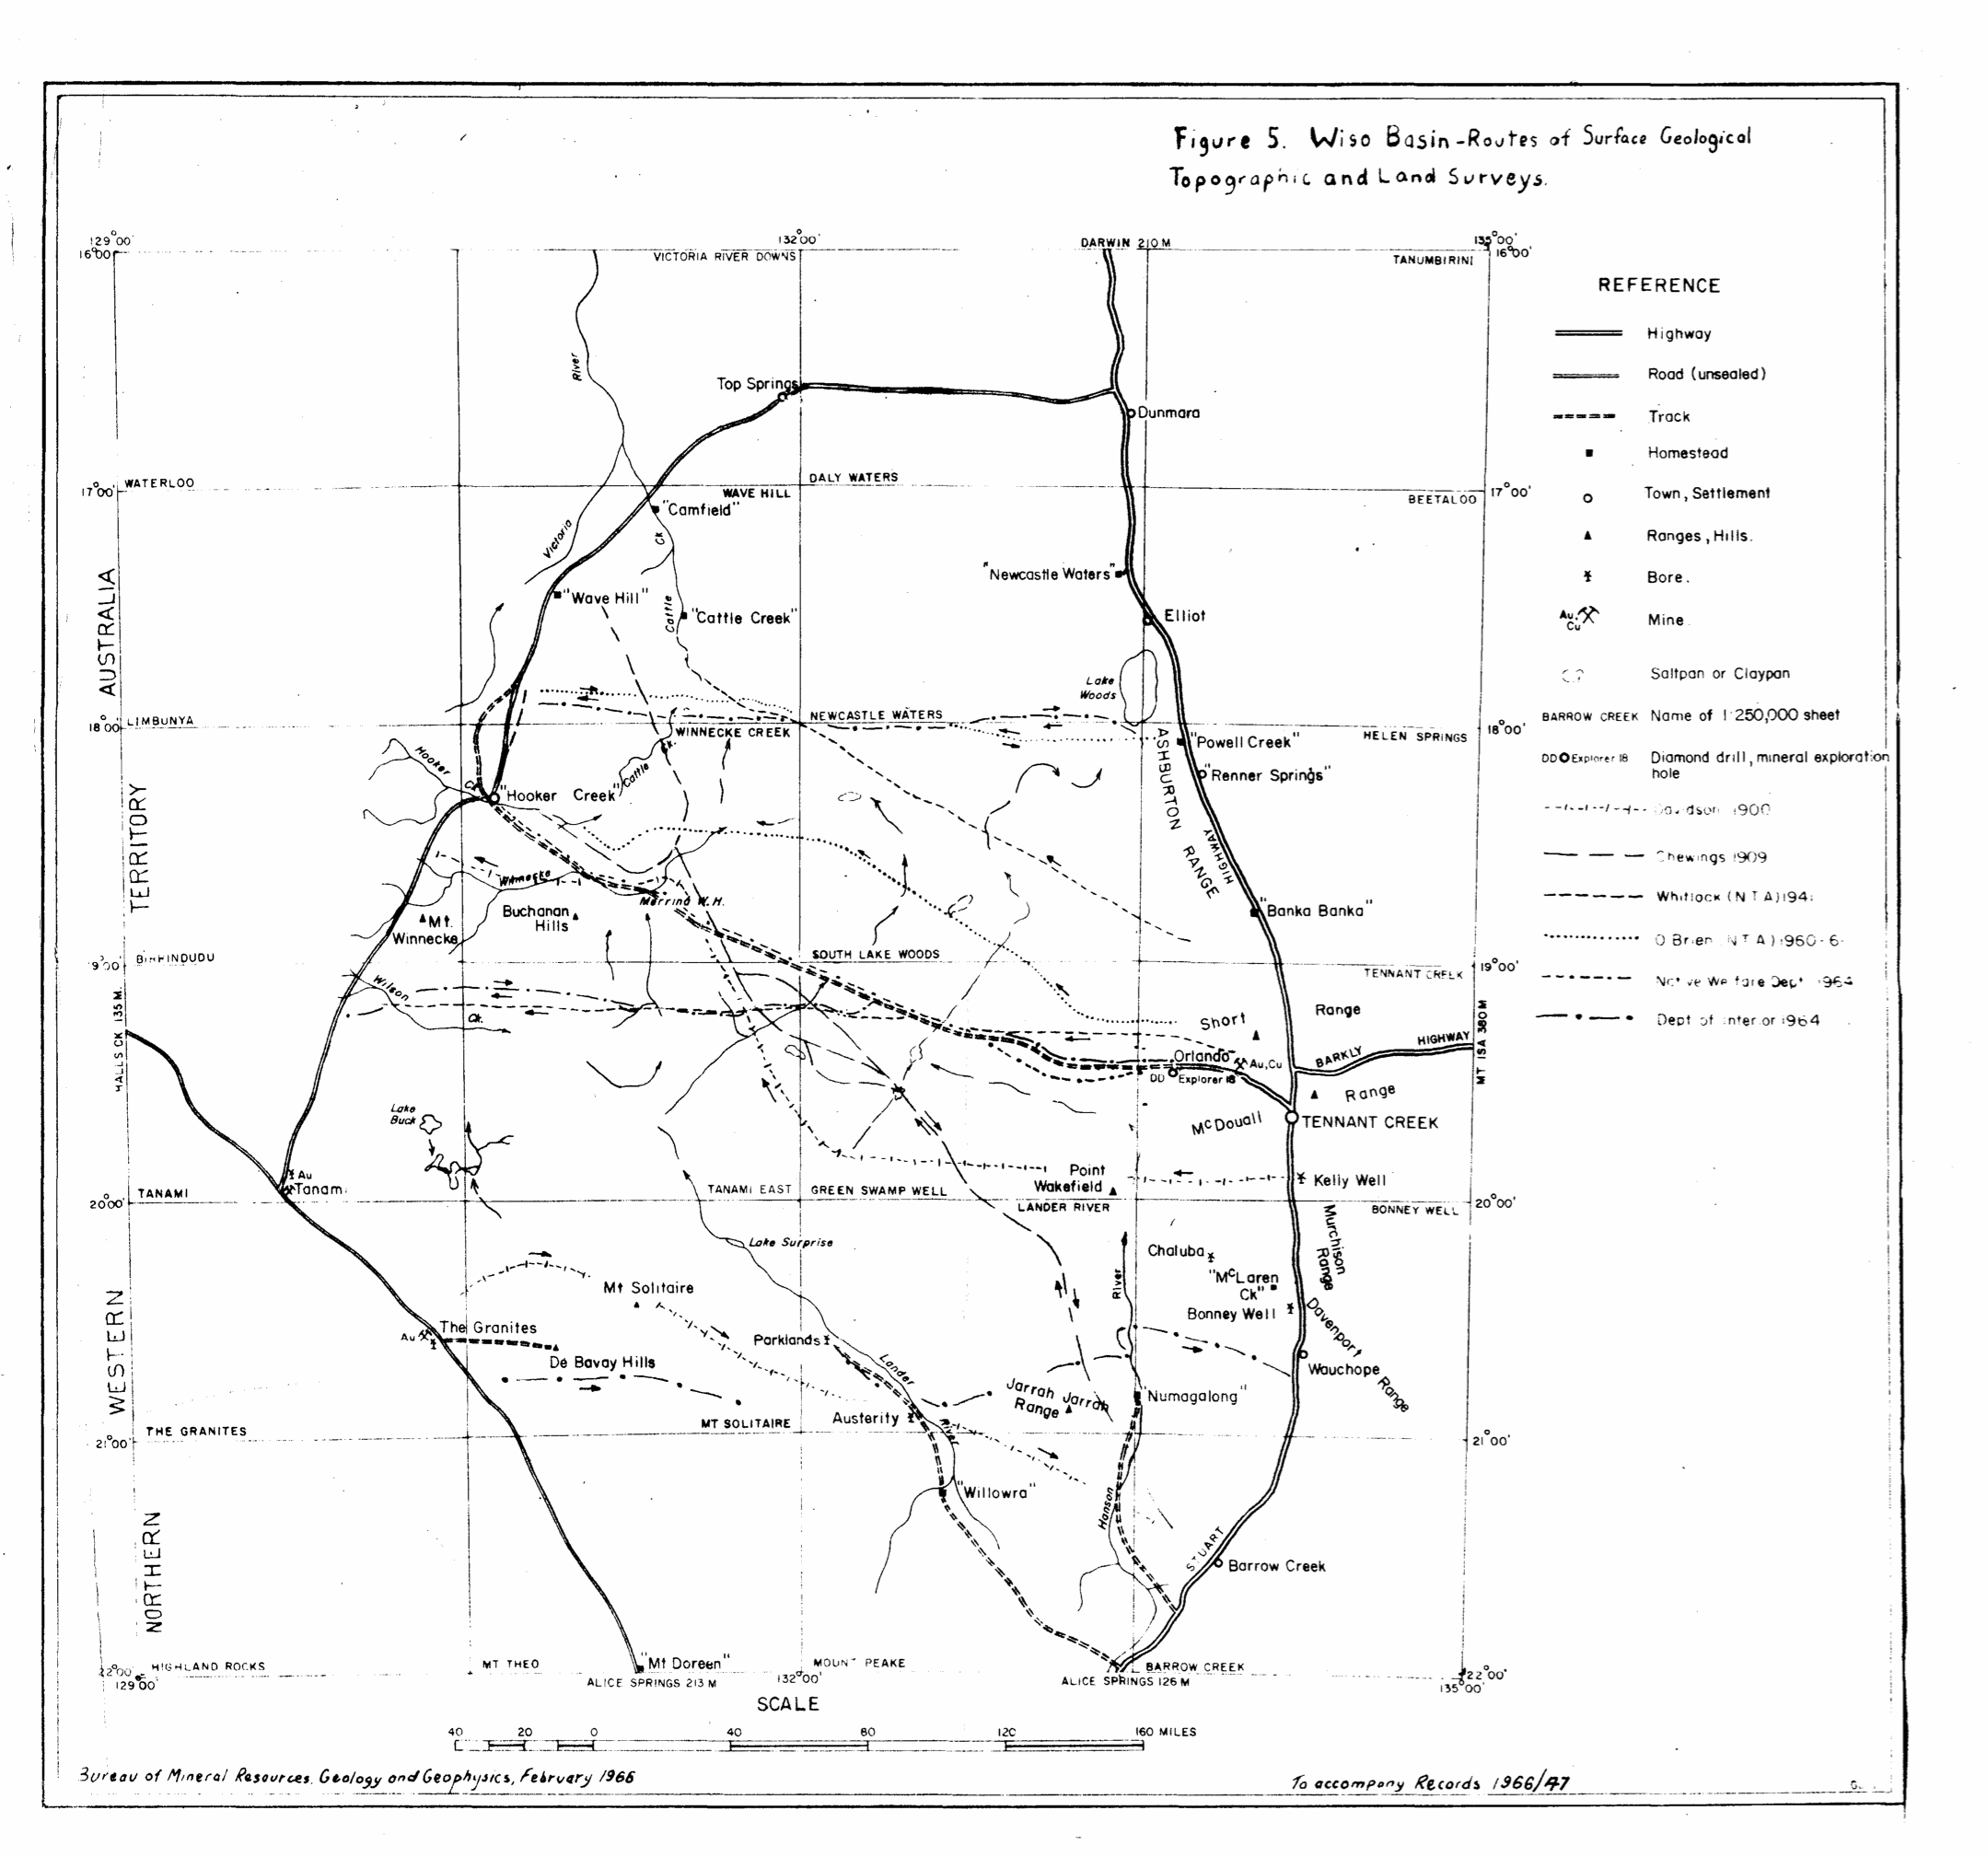 surevy routes to 1964